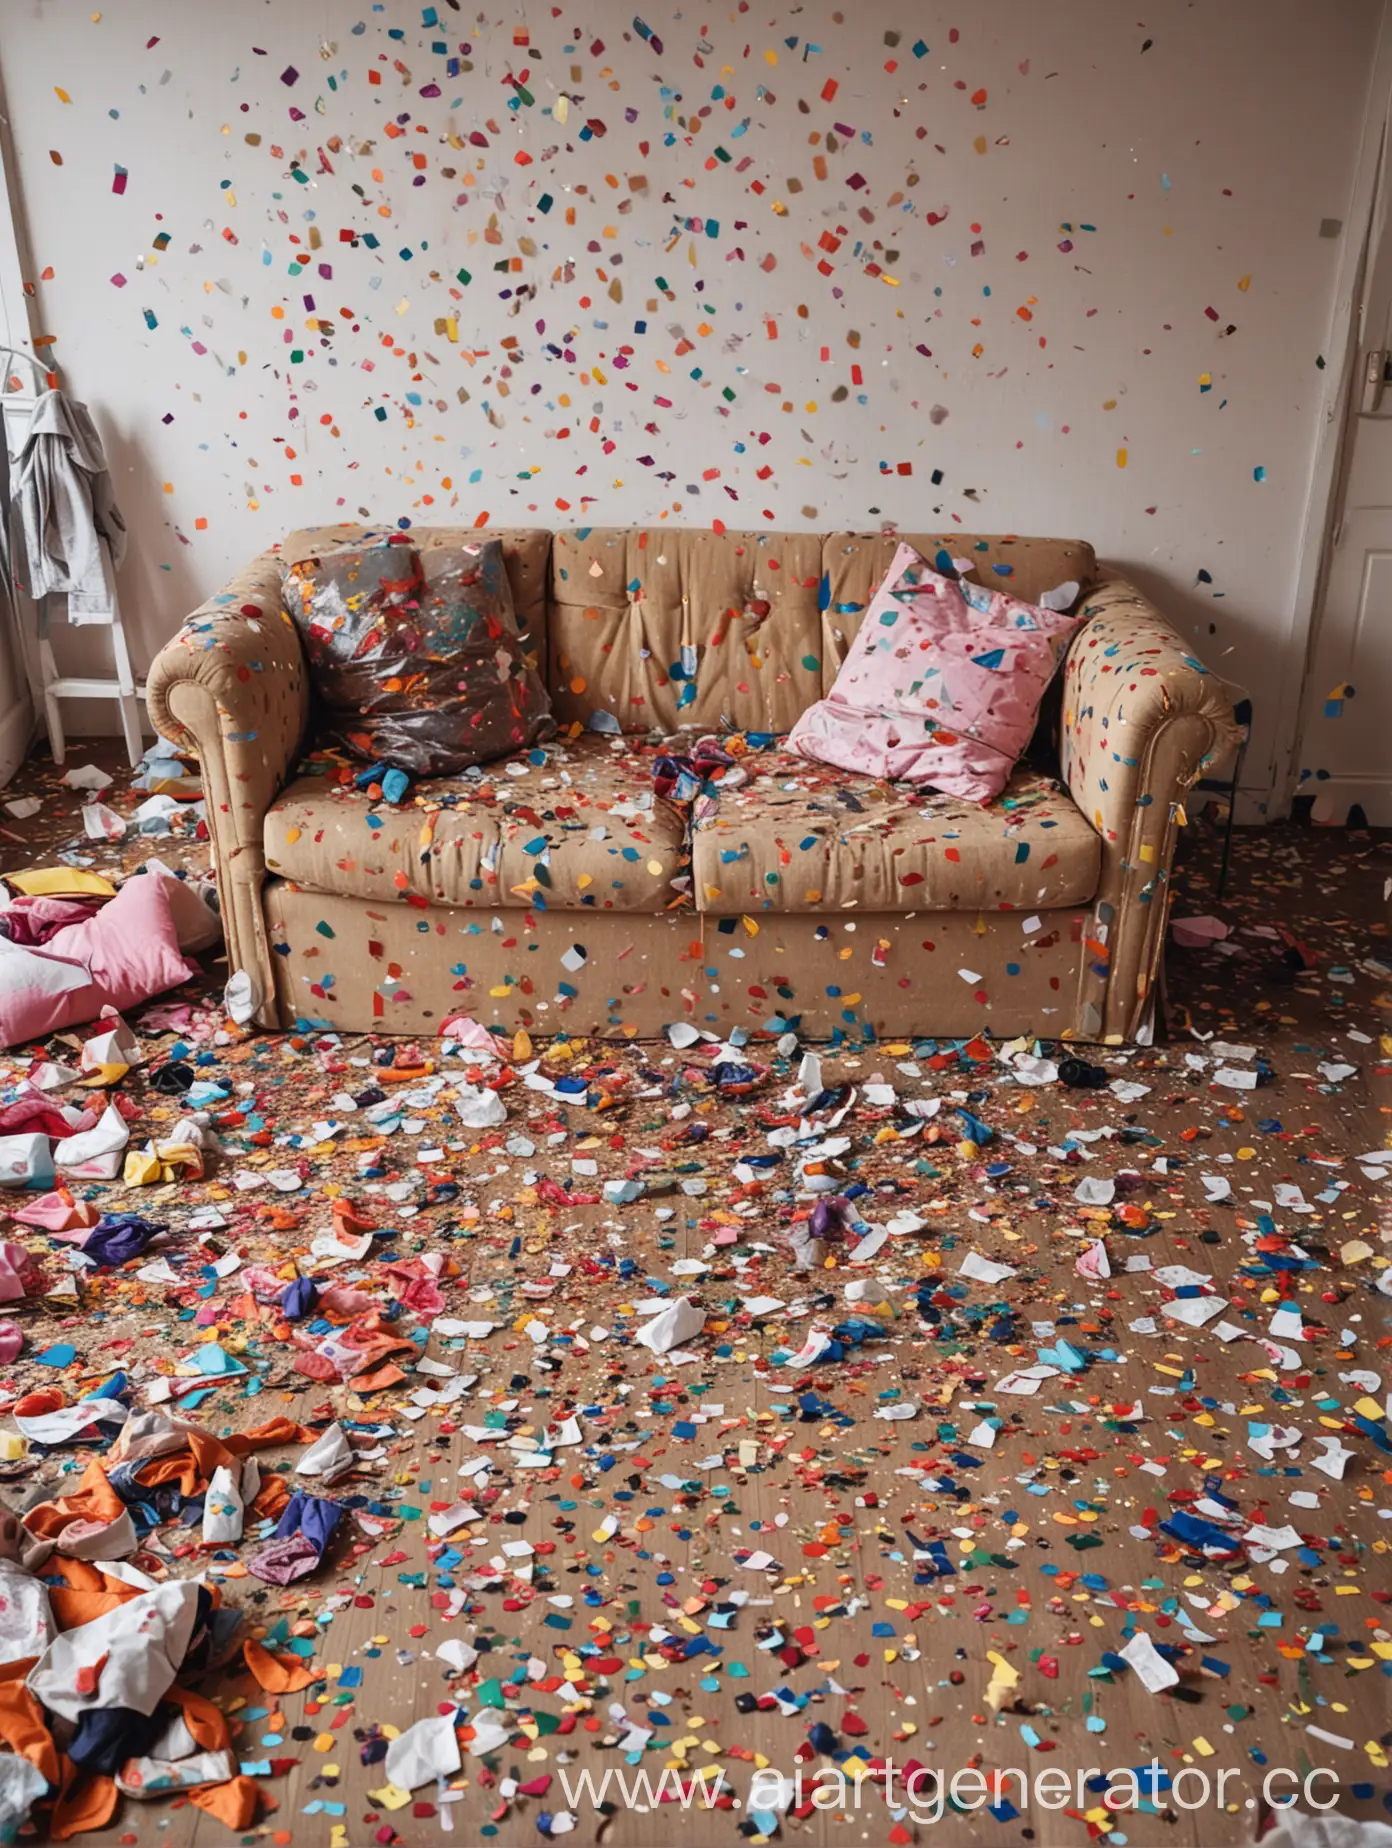 AfterParty-Chaos-Scattered-Confetti-and-Clothes-in-a-Messy-Room